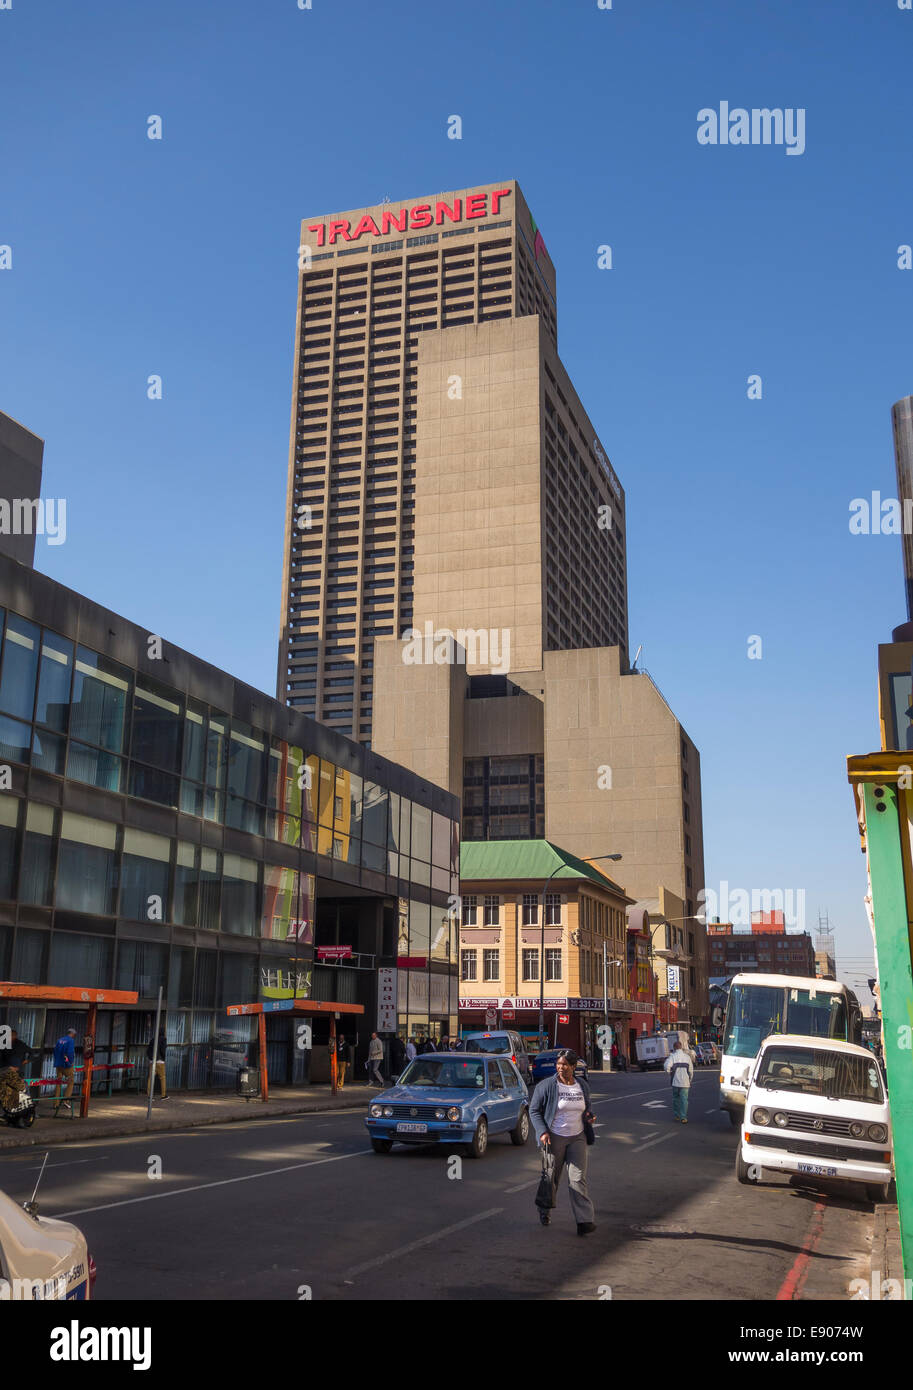 JOHANNESBURG, SOUTH AFRICA - Transnet buildings and other skyscrapers in downtown city center. Stock Photo